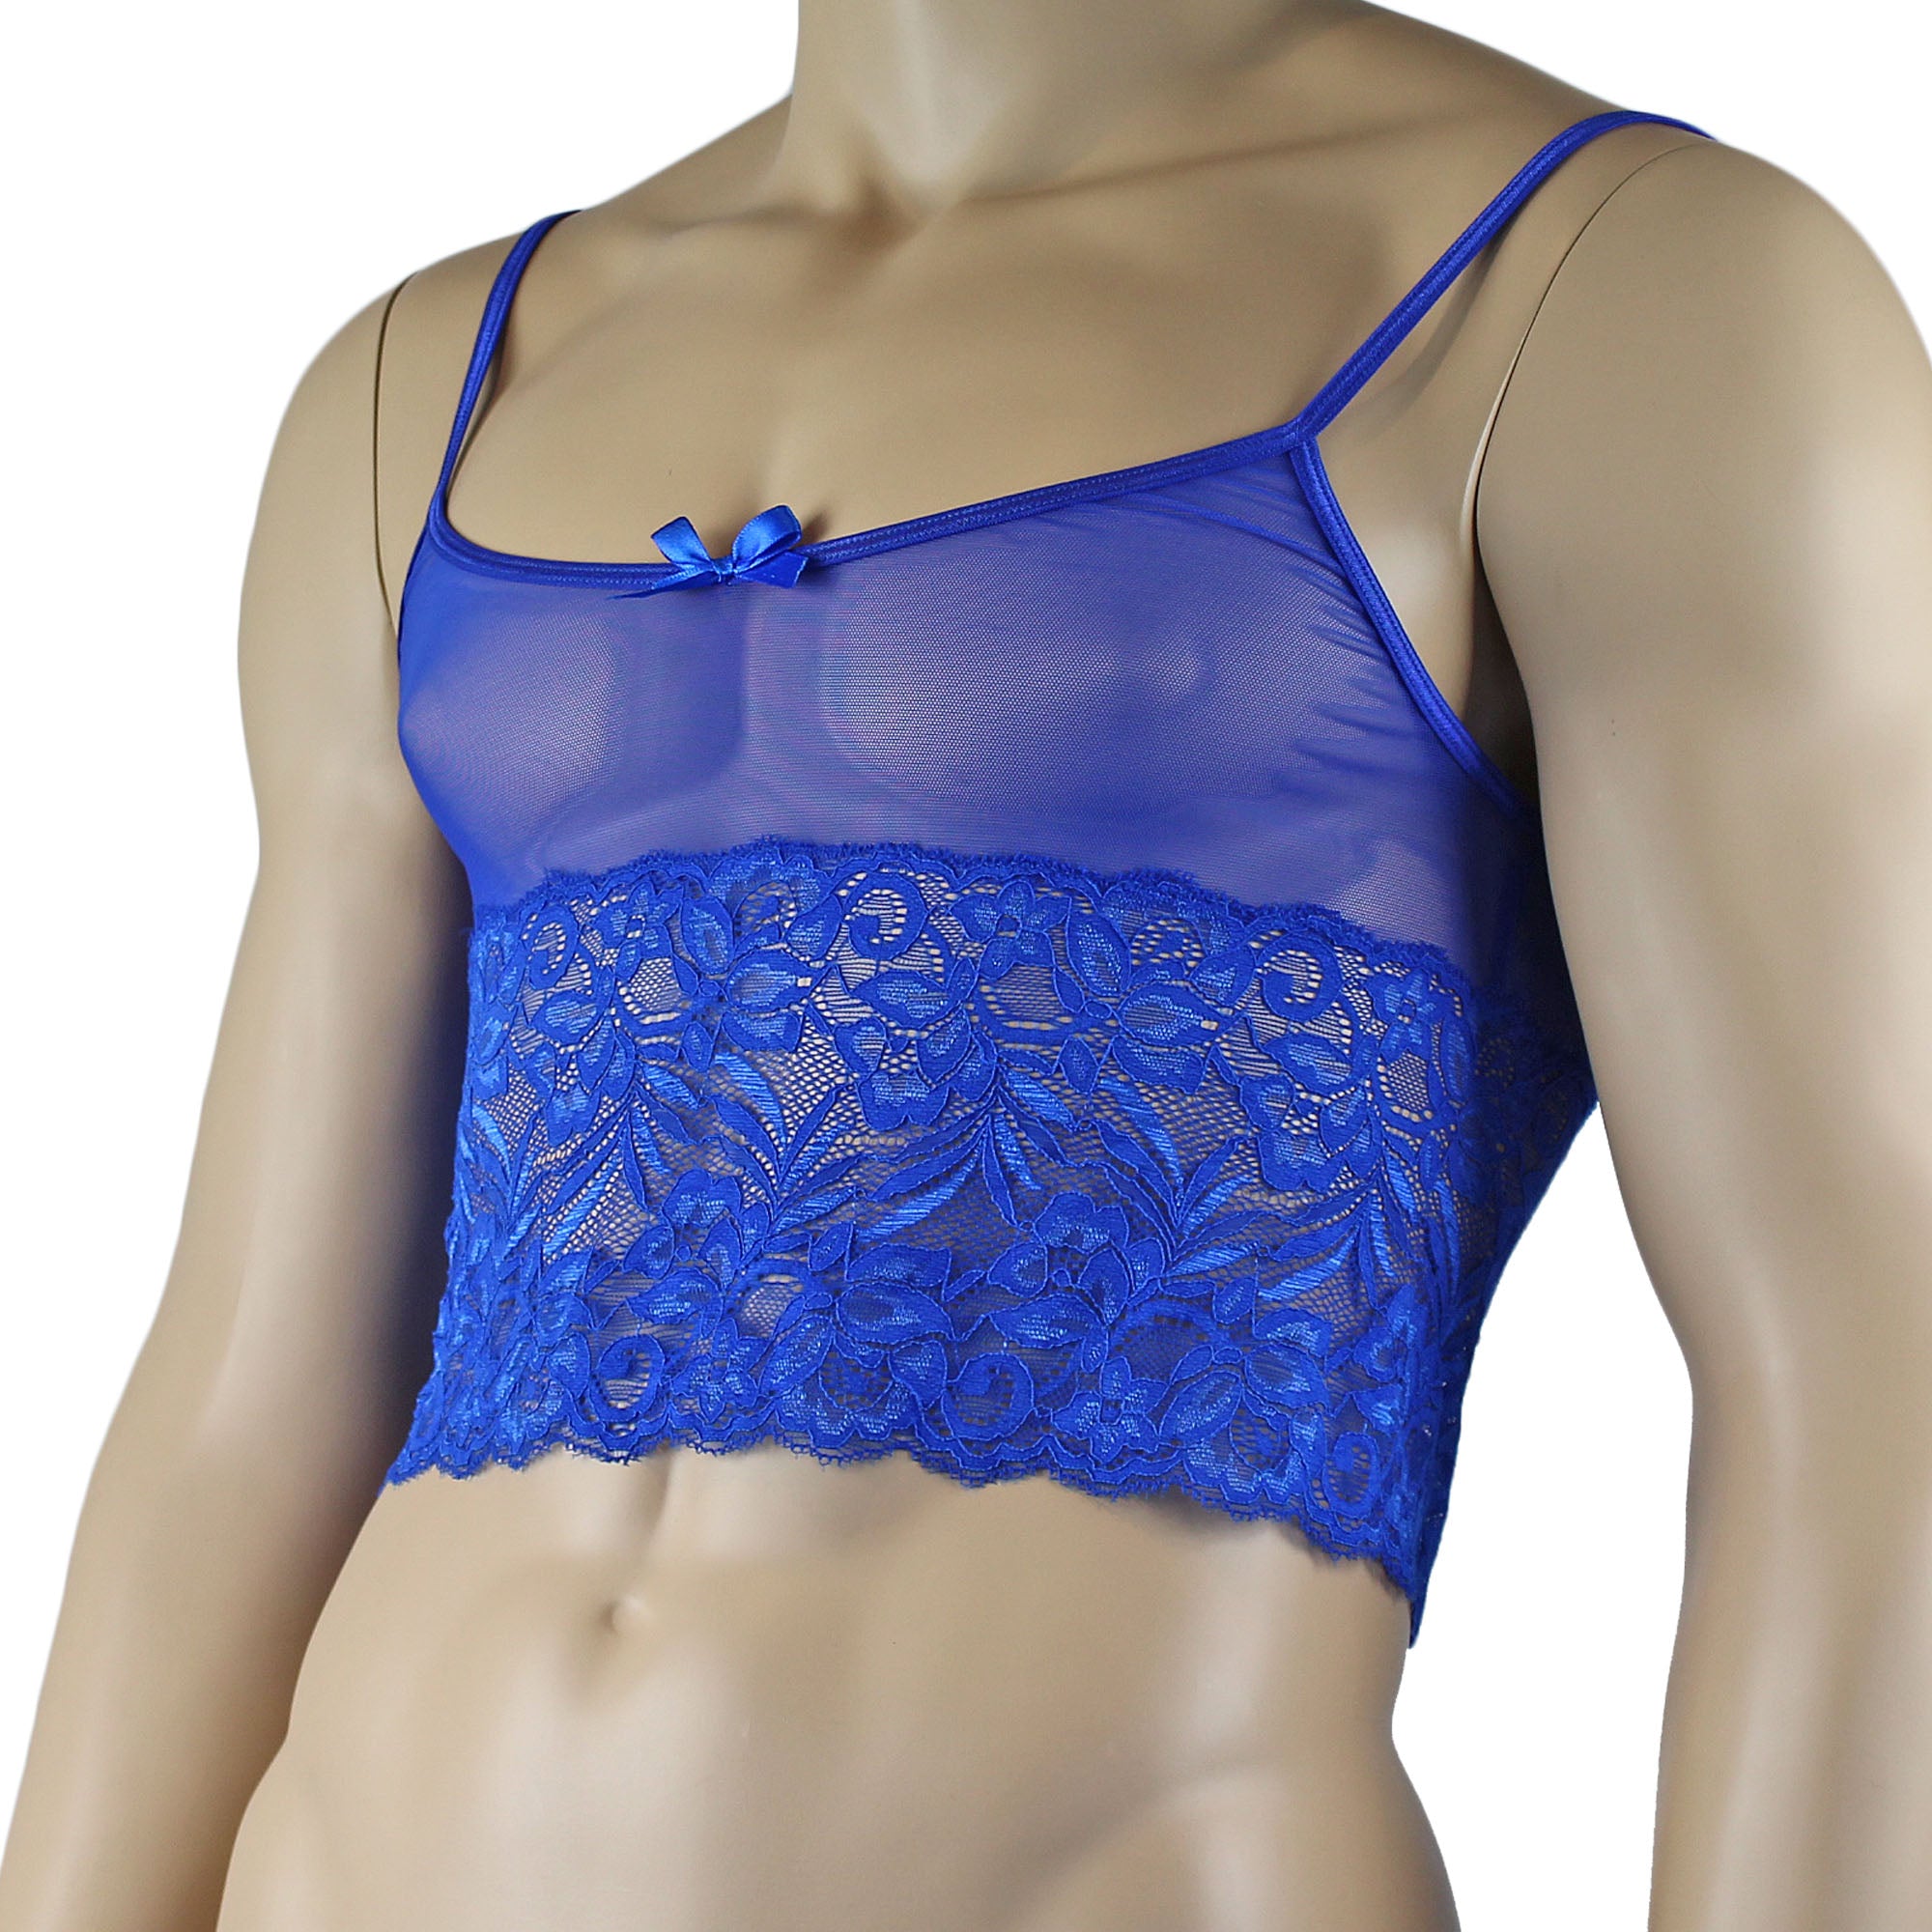 Mens Kristy Sexy Lace Camisole Top Male Lingerie Blue